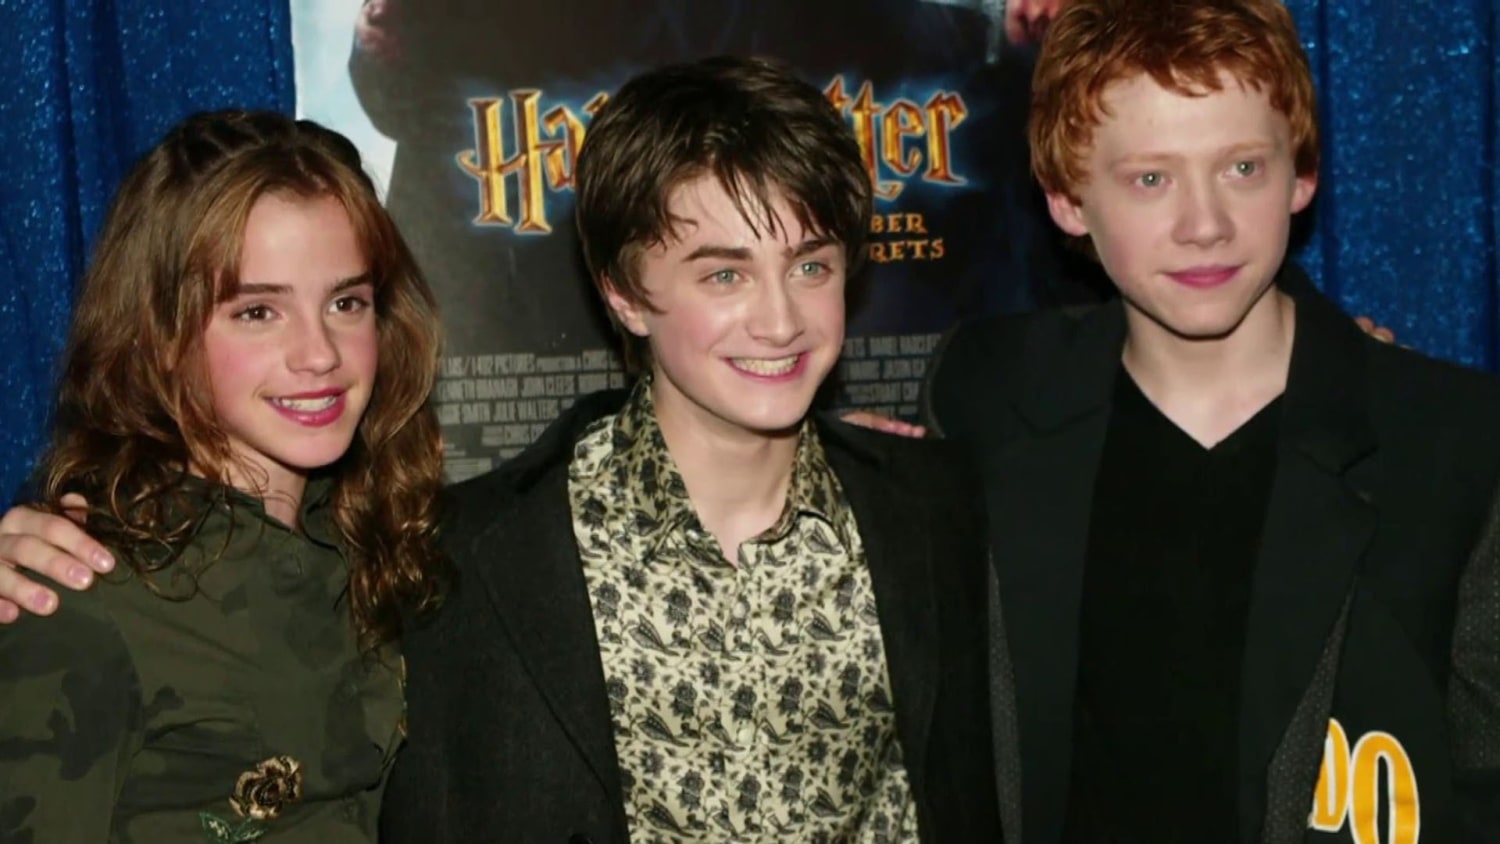 Harry Potter Reunion' trailer: Is HBO Max going to make us feel really old  with this special?